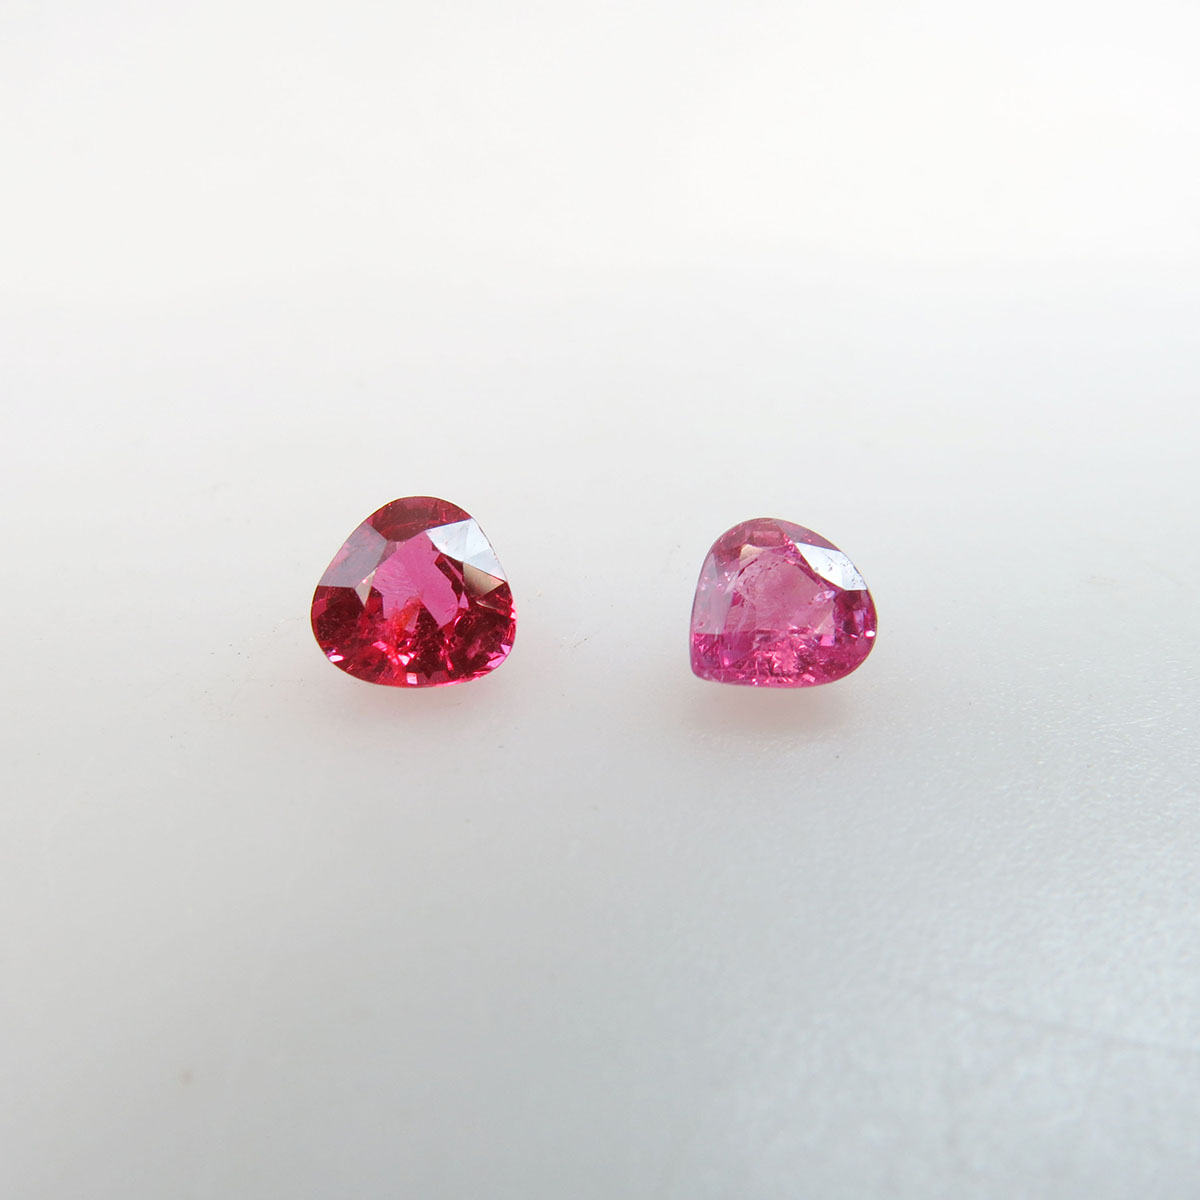 Unmounted Pear Cut Spinel And Pink Sapphire